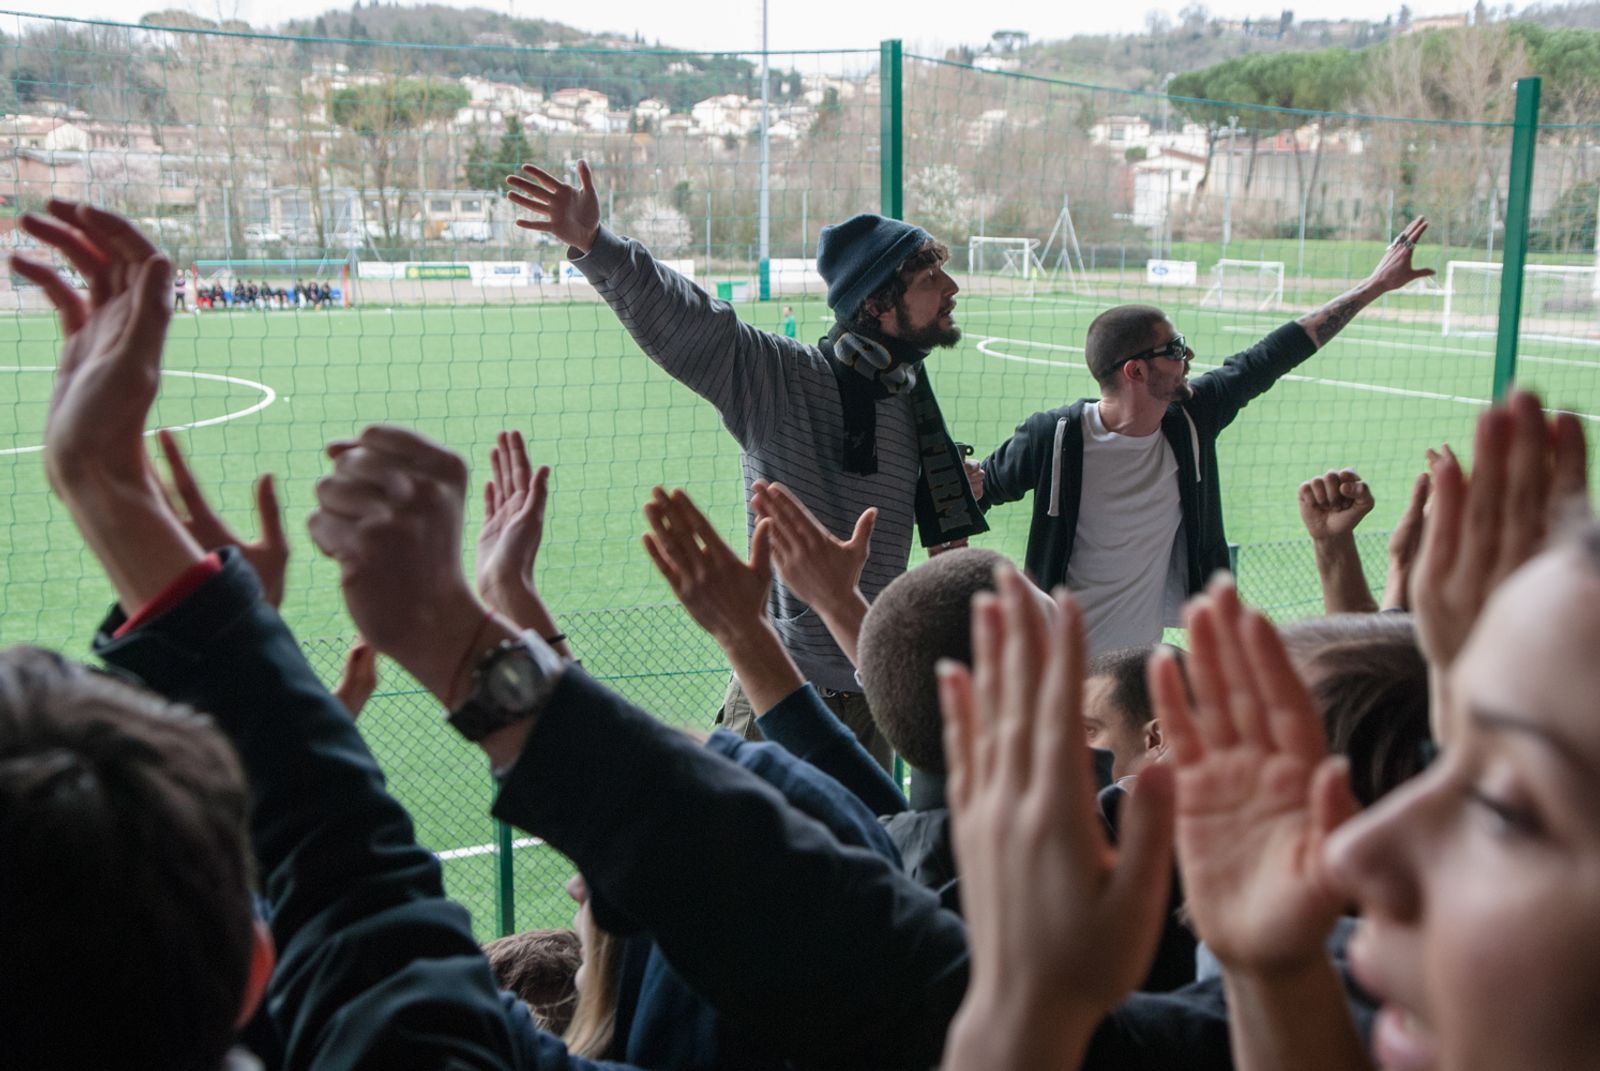 © Sara Esposito - The exultation in the curve of the ultras "Ultimi Rimasti", during a home match.